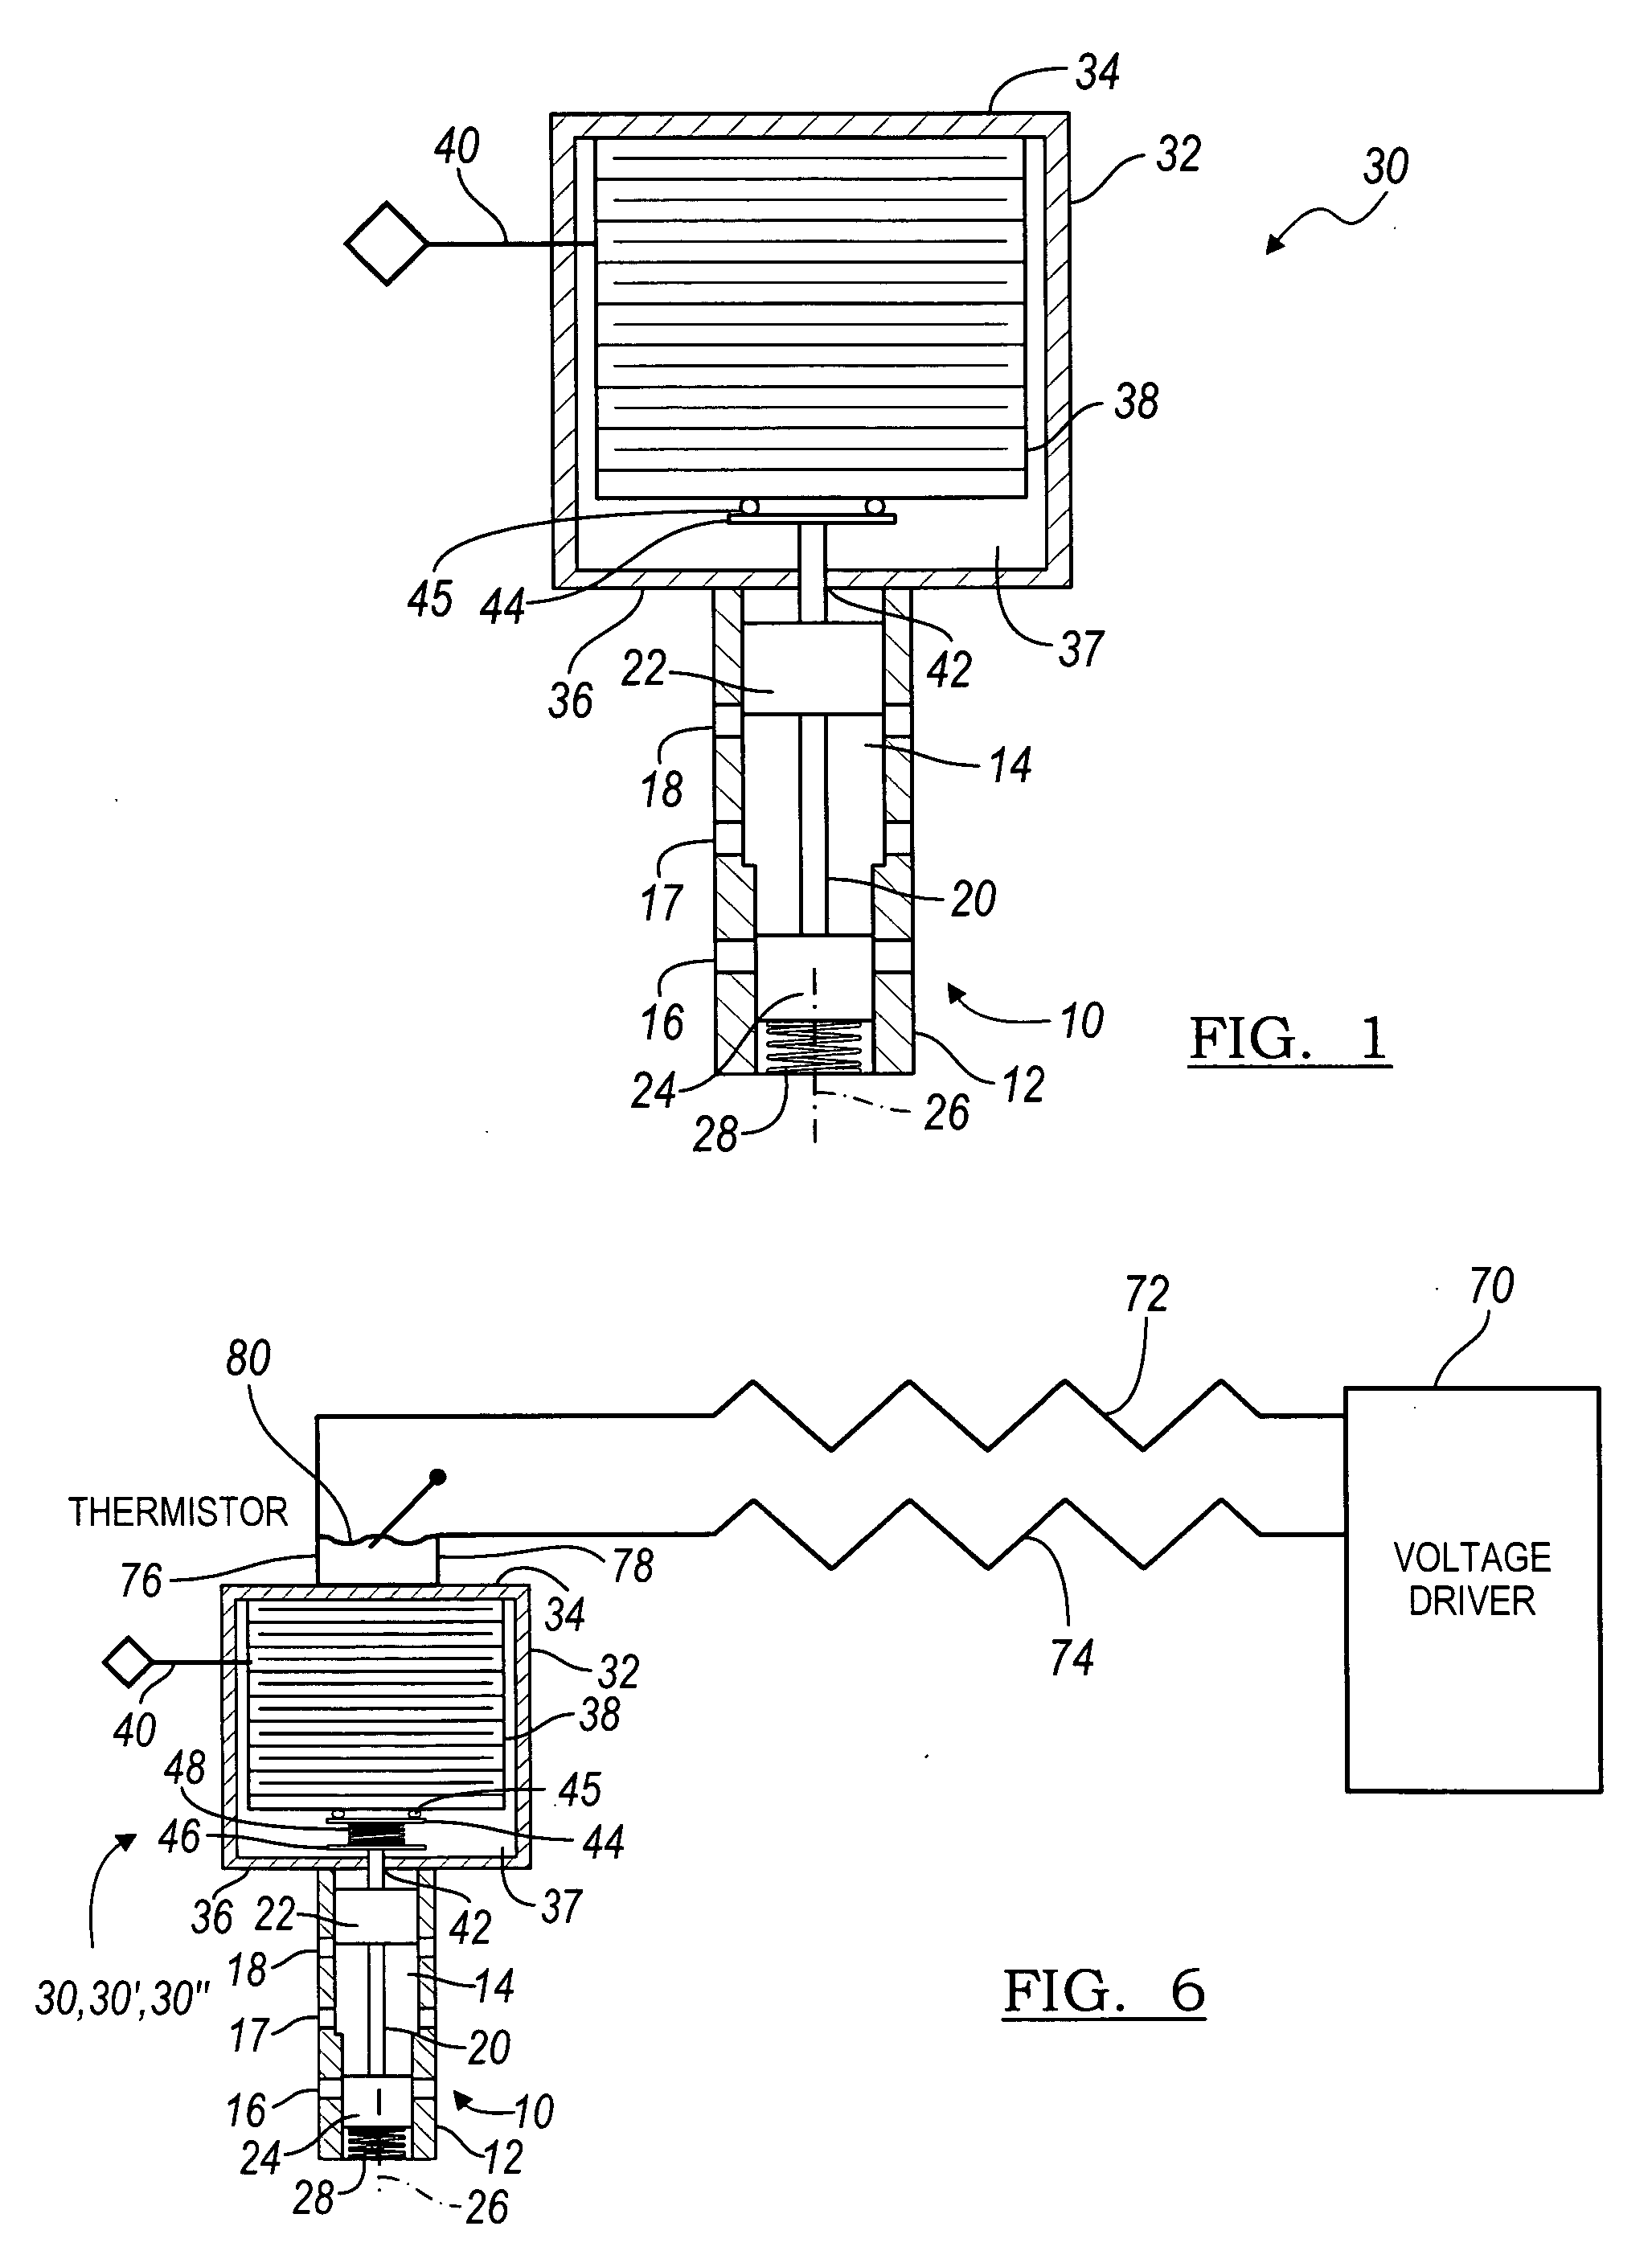 Hydraulic valve actuated by piezoelectric effect